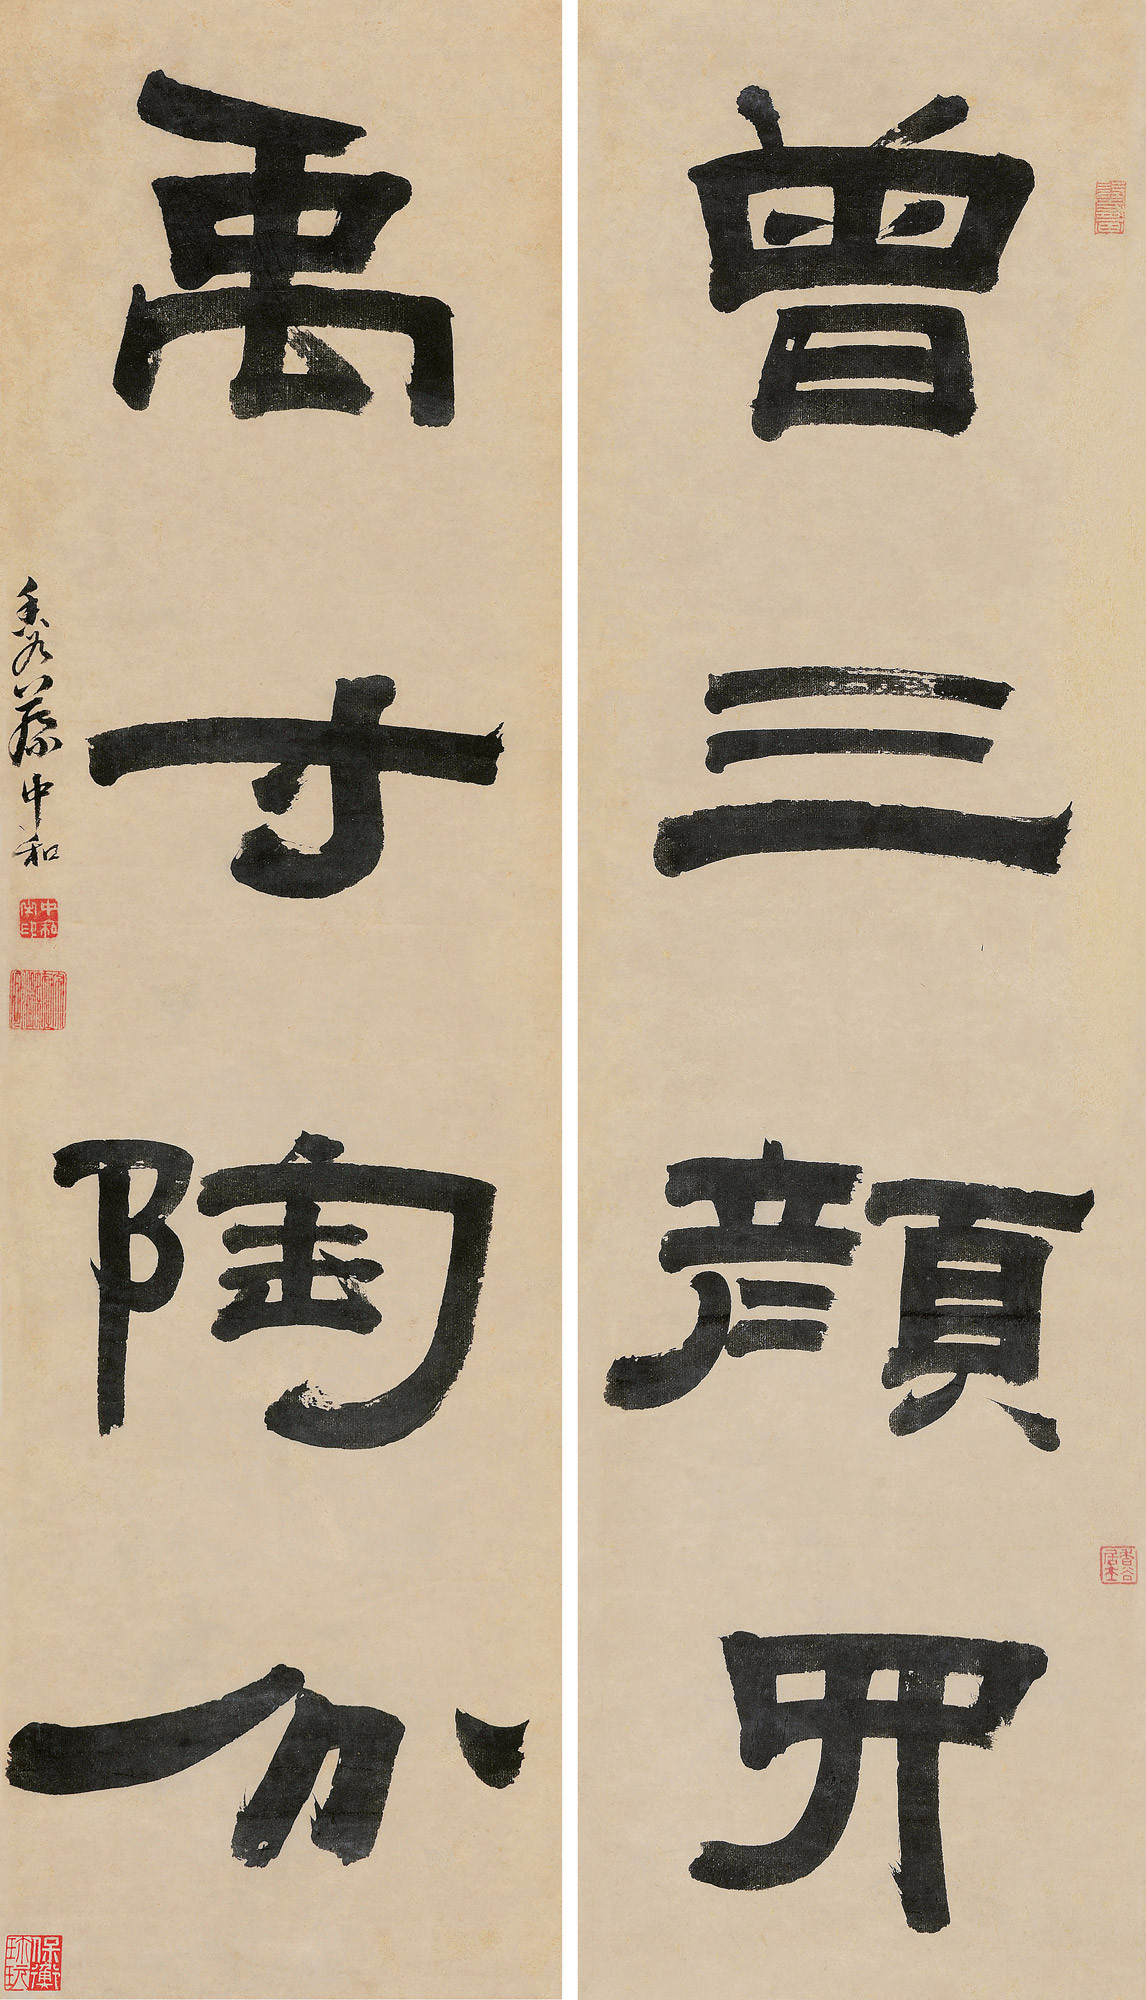 FOUR-CHARACTER CALLIGRAPHY COUPLET IN CLERICAL SCRIPT